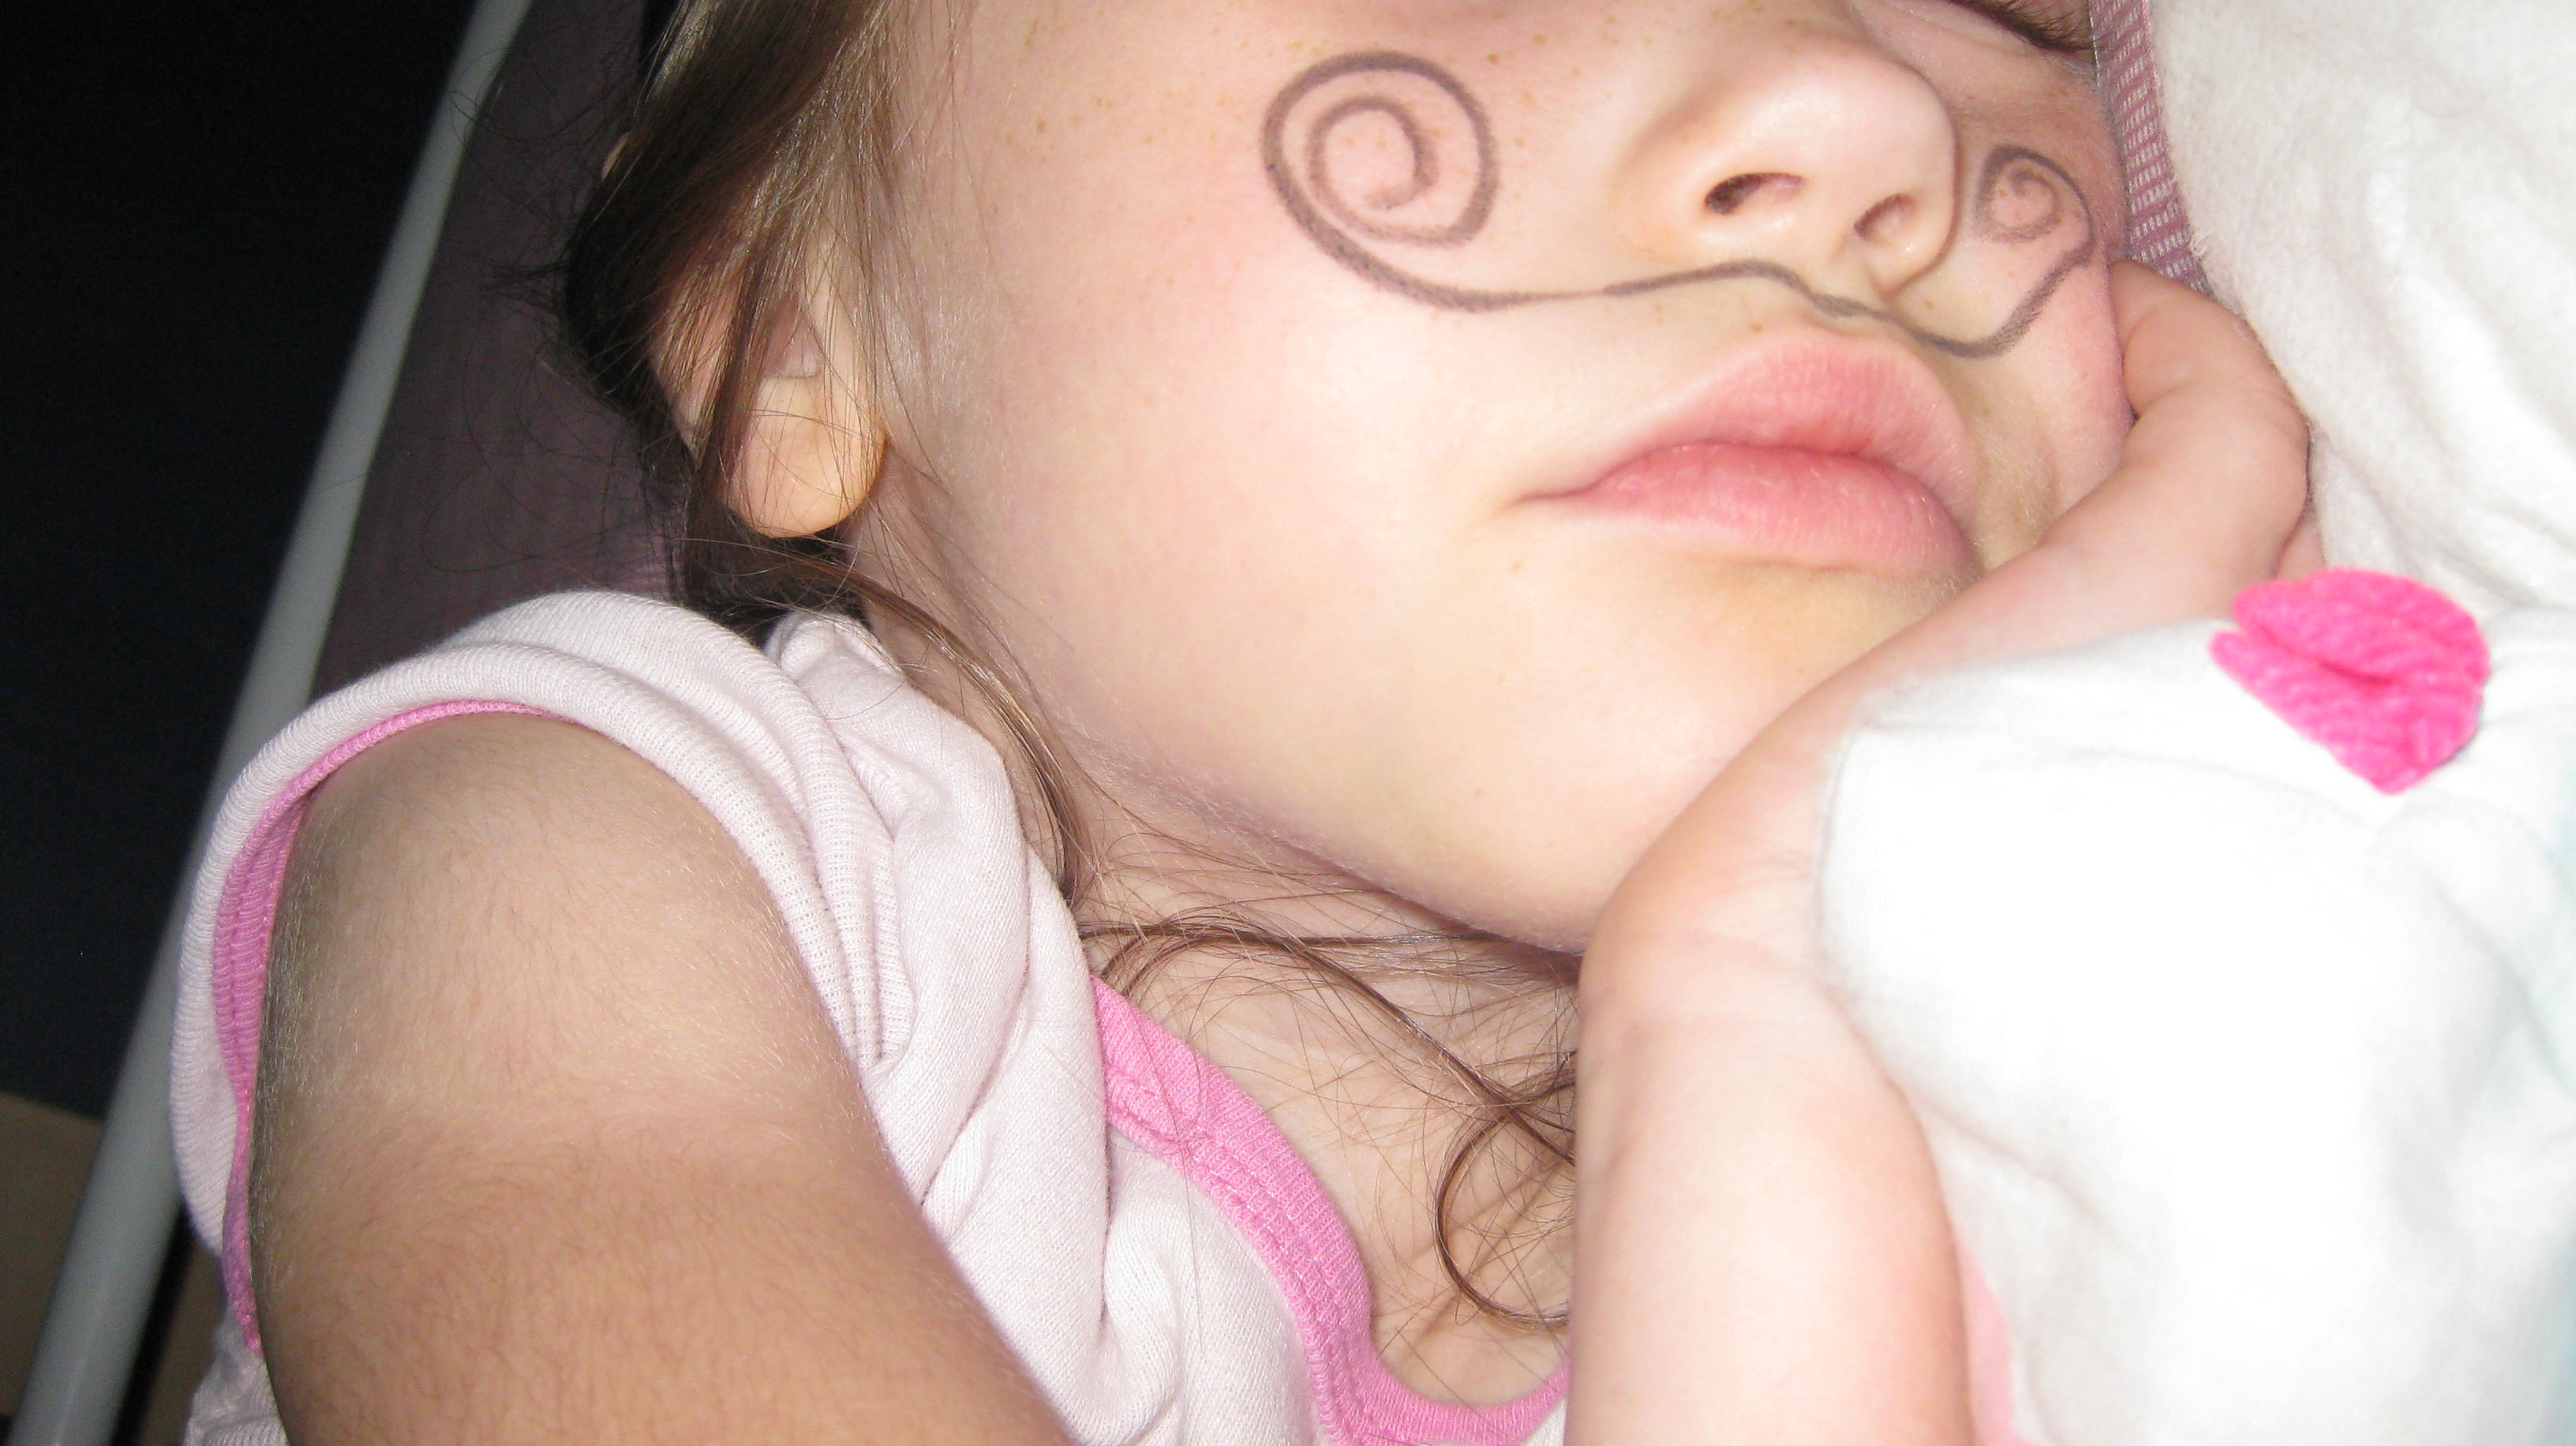 Using eye liner, draw a mustache on them while sleeping.